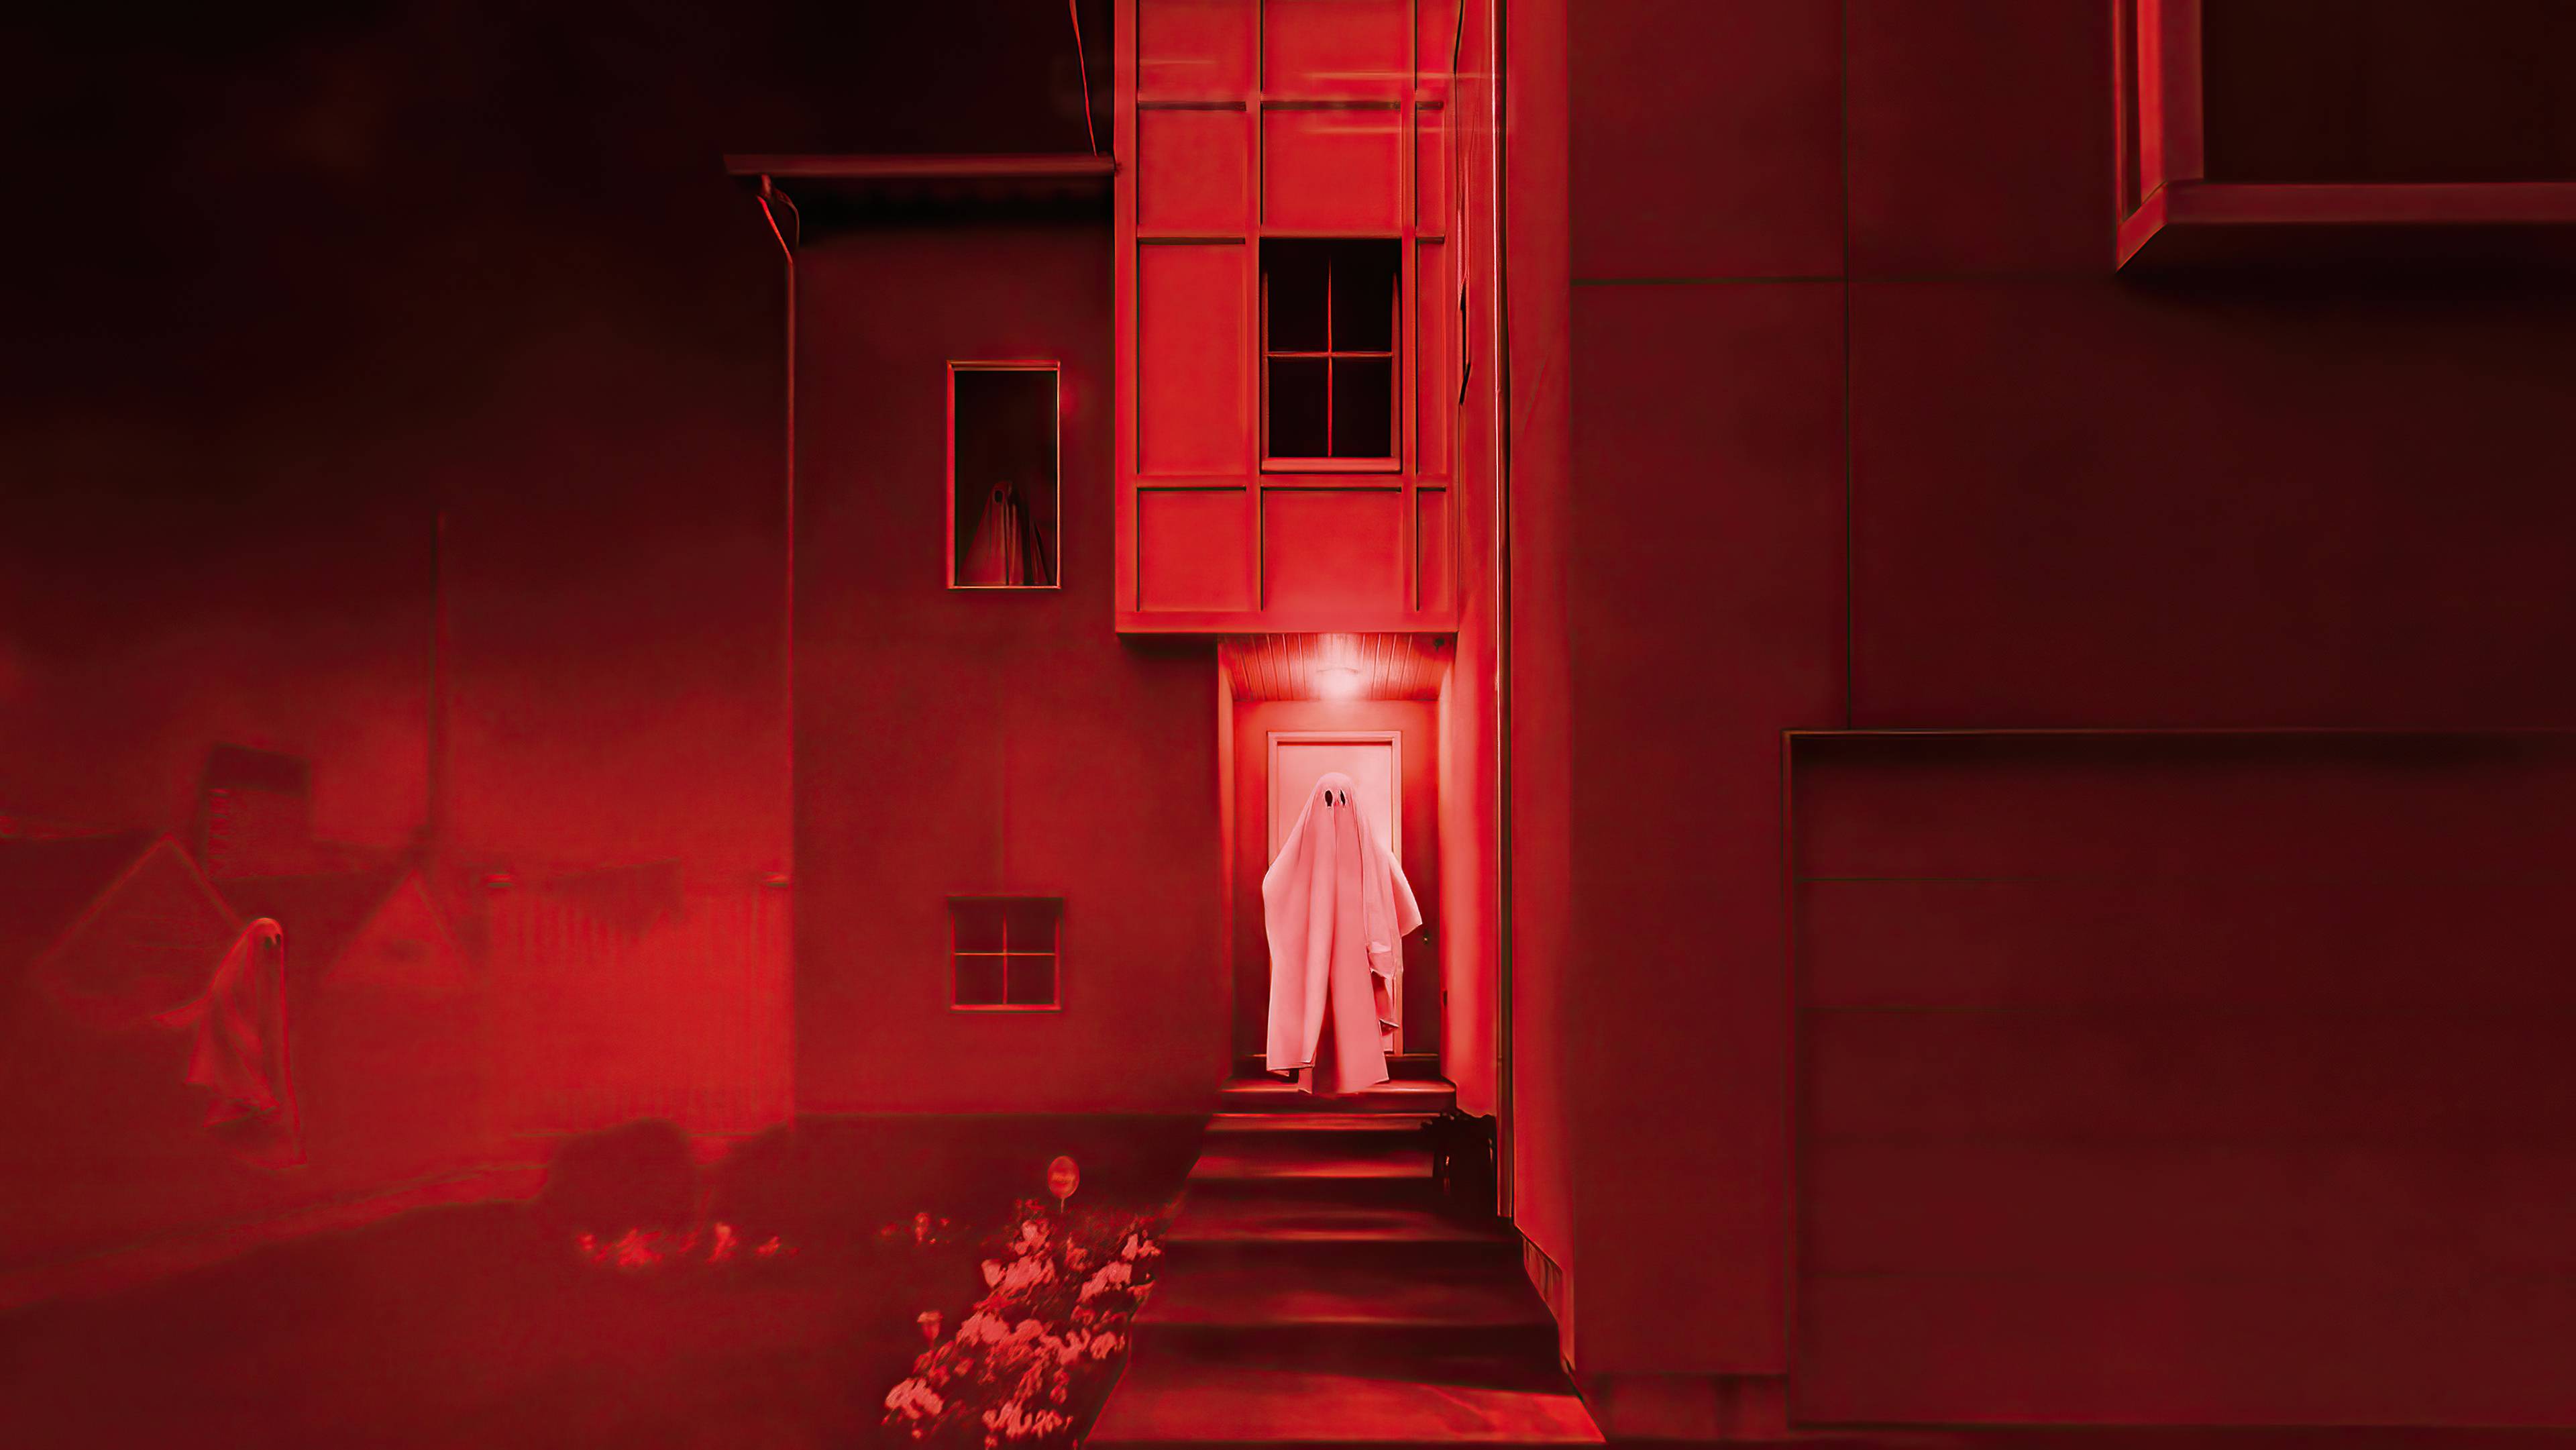 The house that jack built movie poster - Ghost